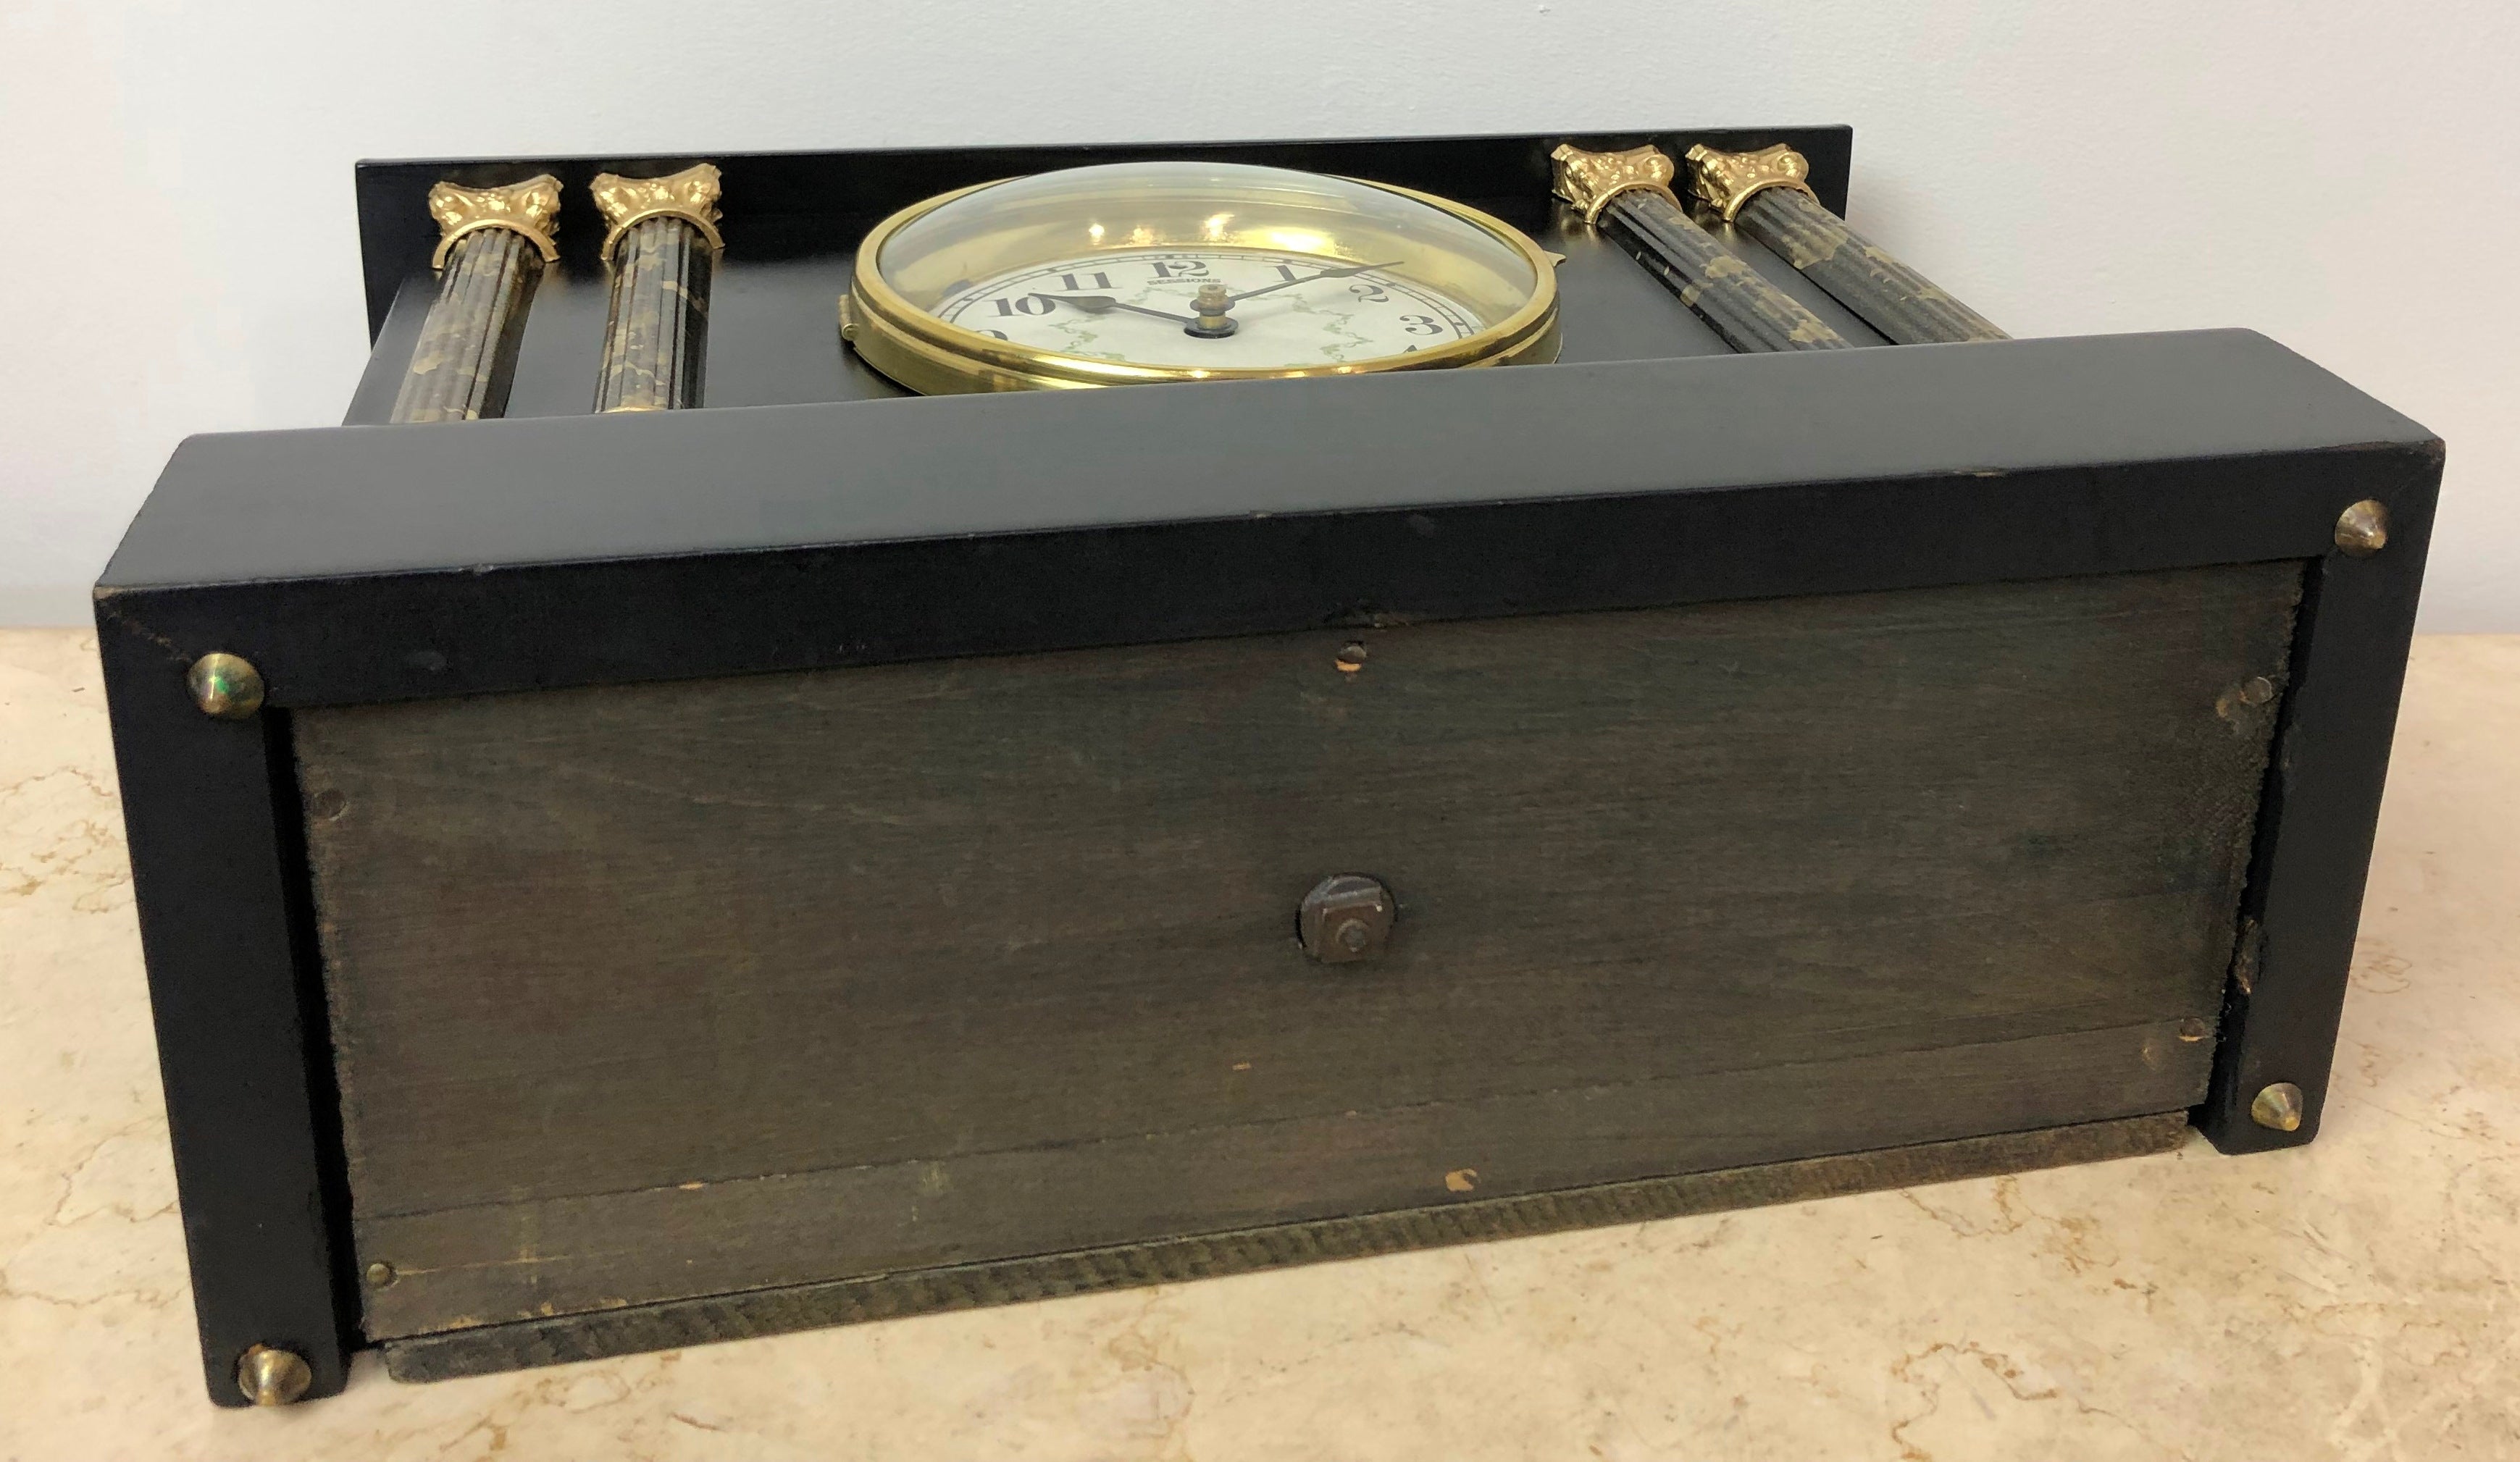 Antique Sessions USA Chime Mantel Clock | eXibit collection